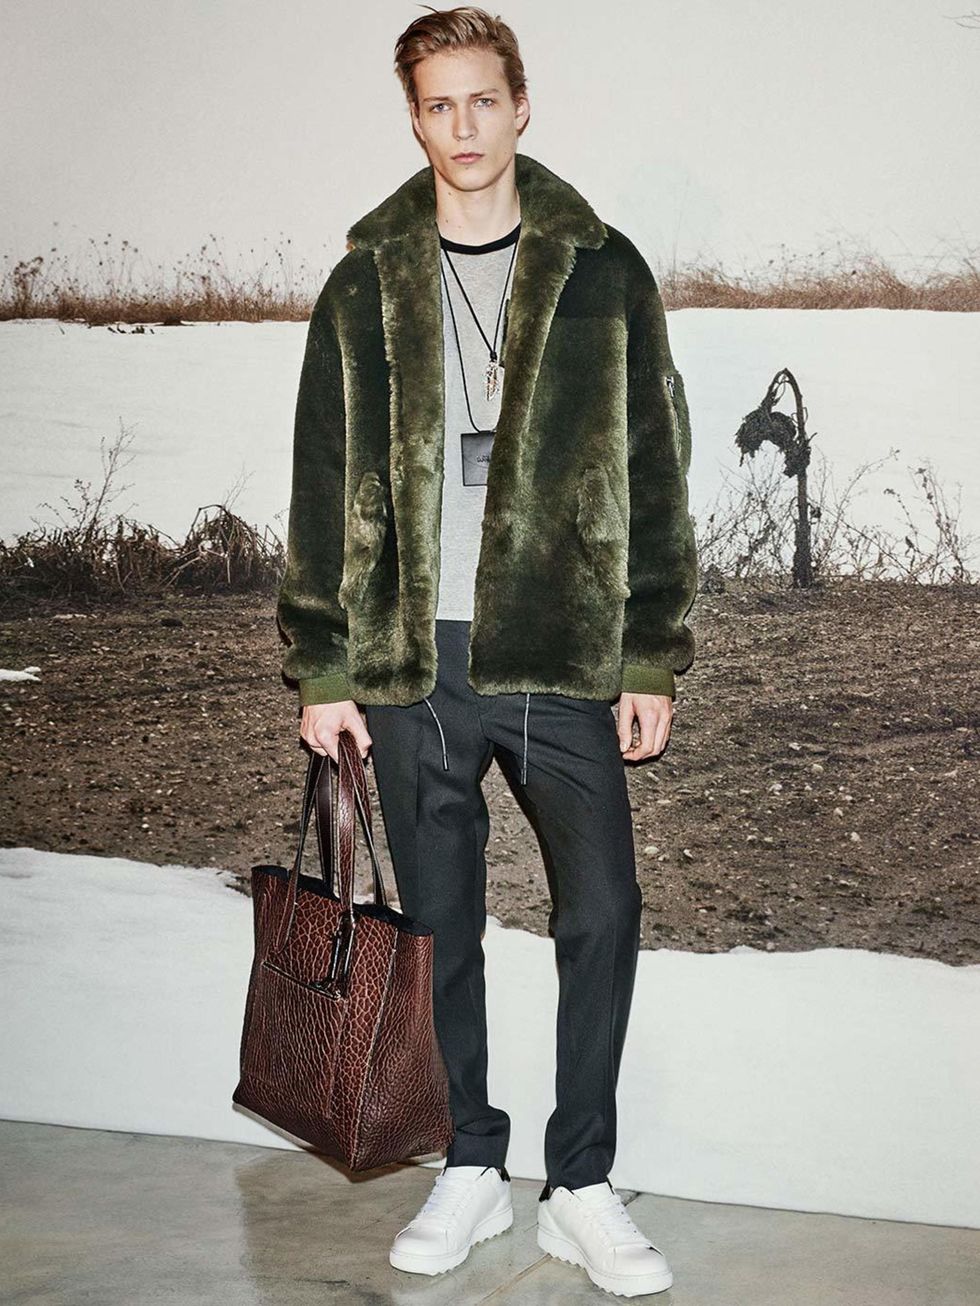 Stuart Vevers unveiled the first ever men's collection from Coach, heavy on shearling coats that you'll want to borrow from your boyfriend.